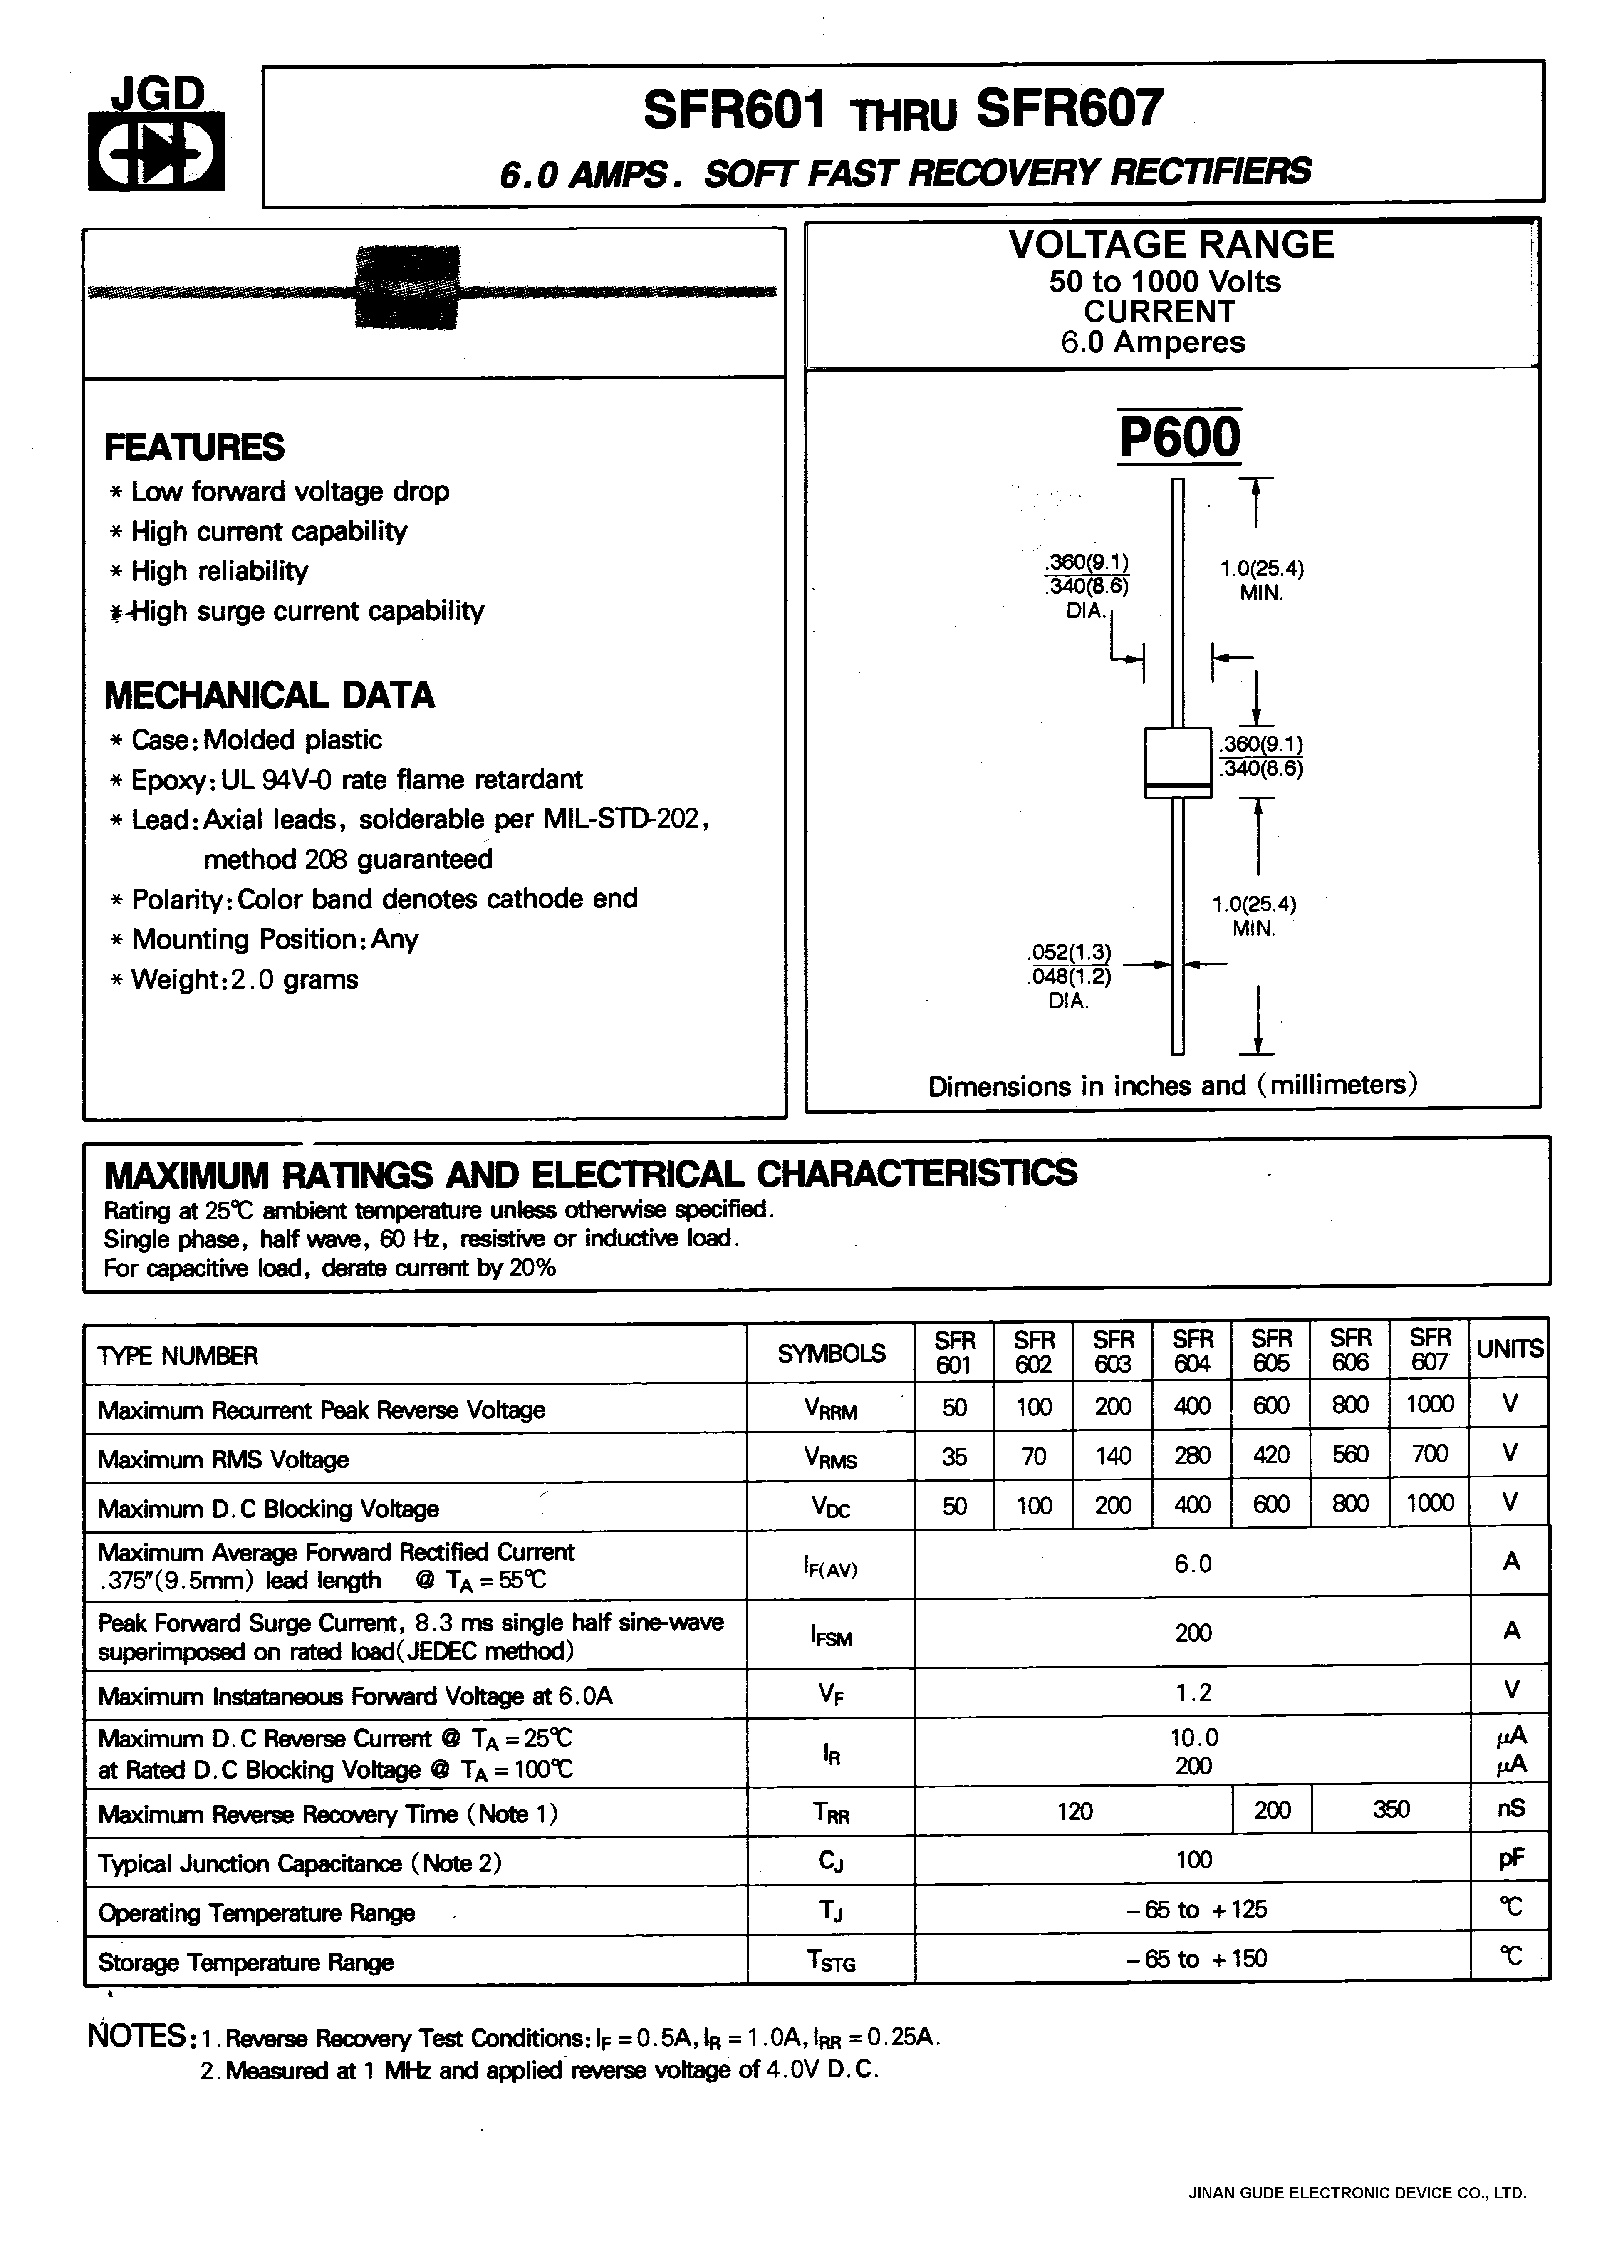 Datasheet SFR606 - 6.0 AMPS. SOFT FAST RECOVERY RECTIFIERS page 1